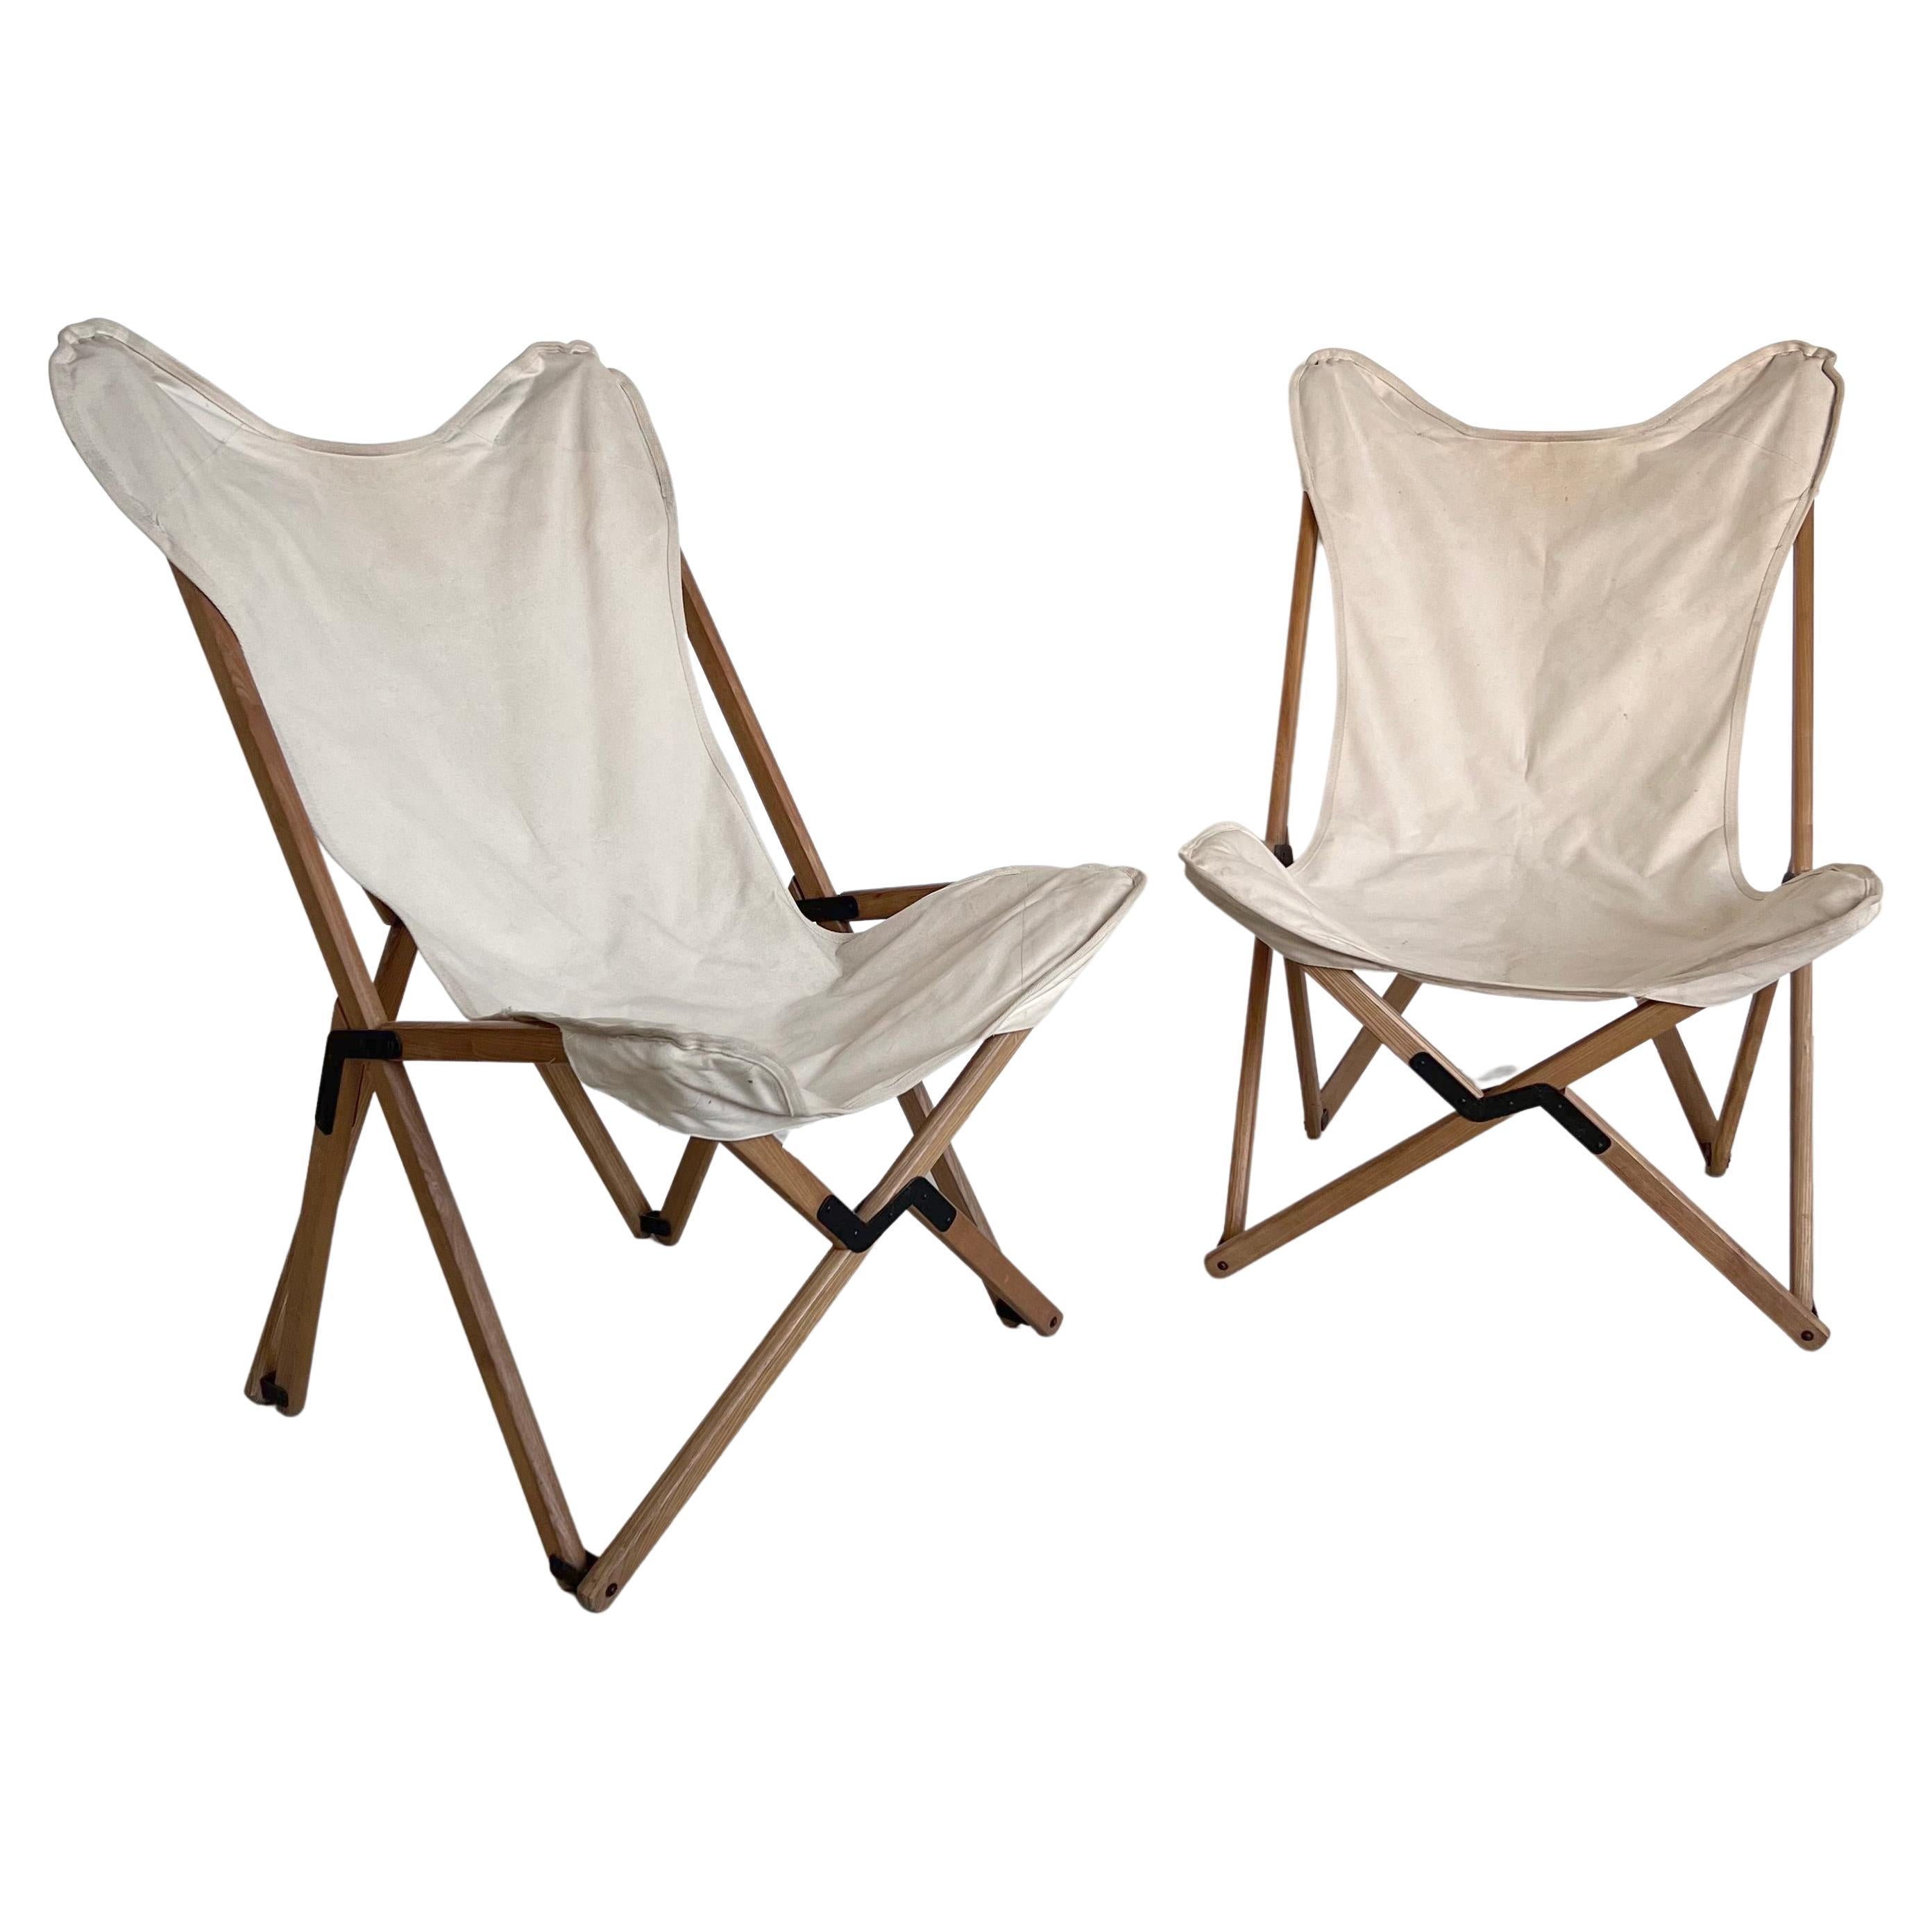 Vintage Foldable Garden / Outdoor Chairs in Wood and White Canvas Boho Chic